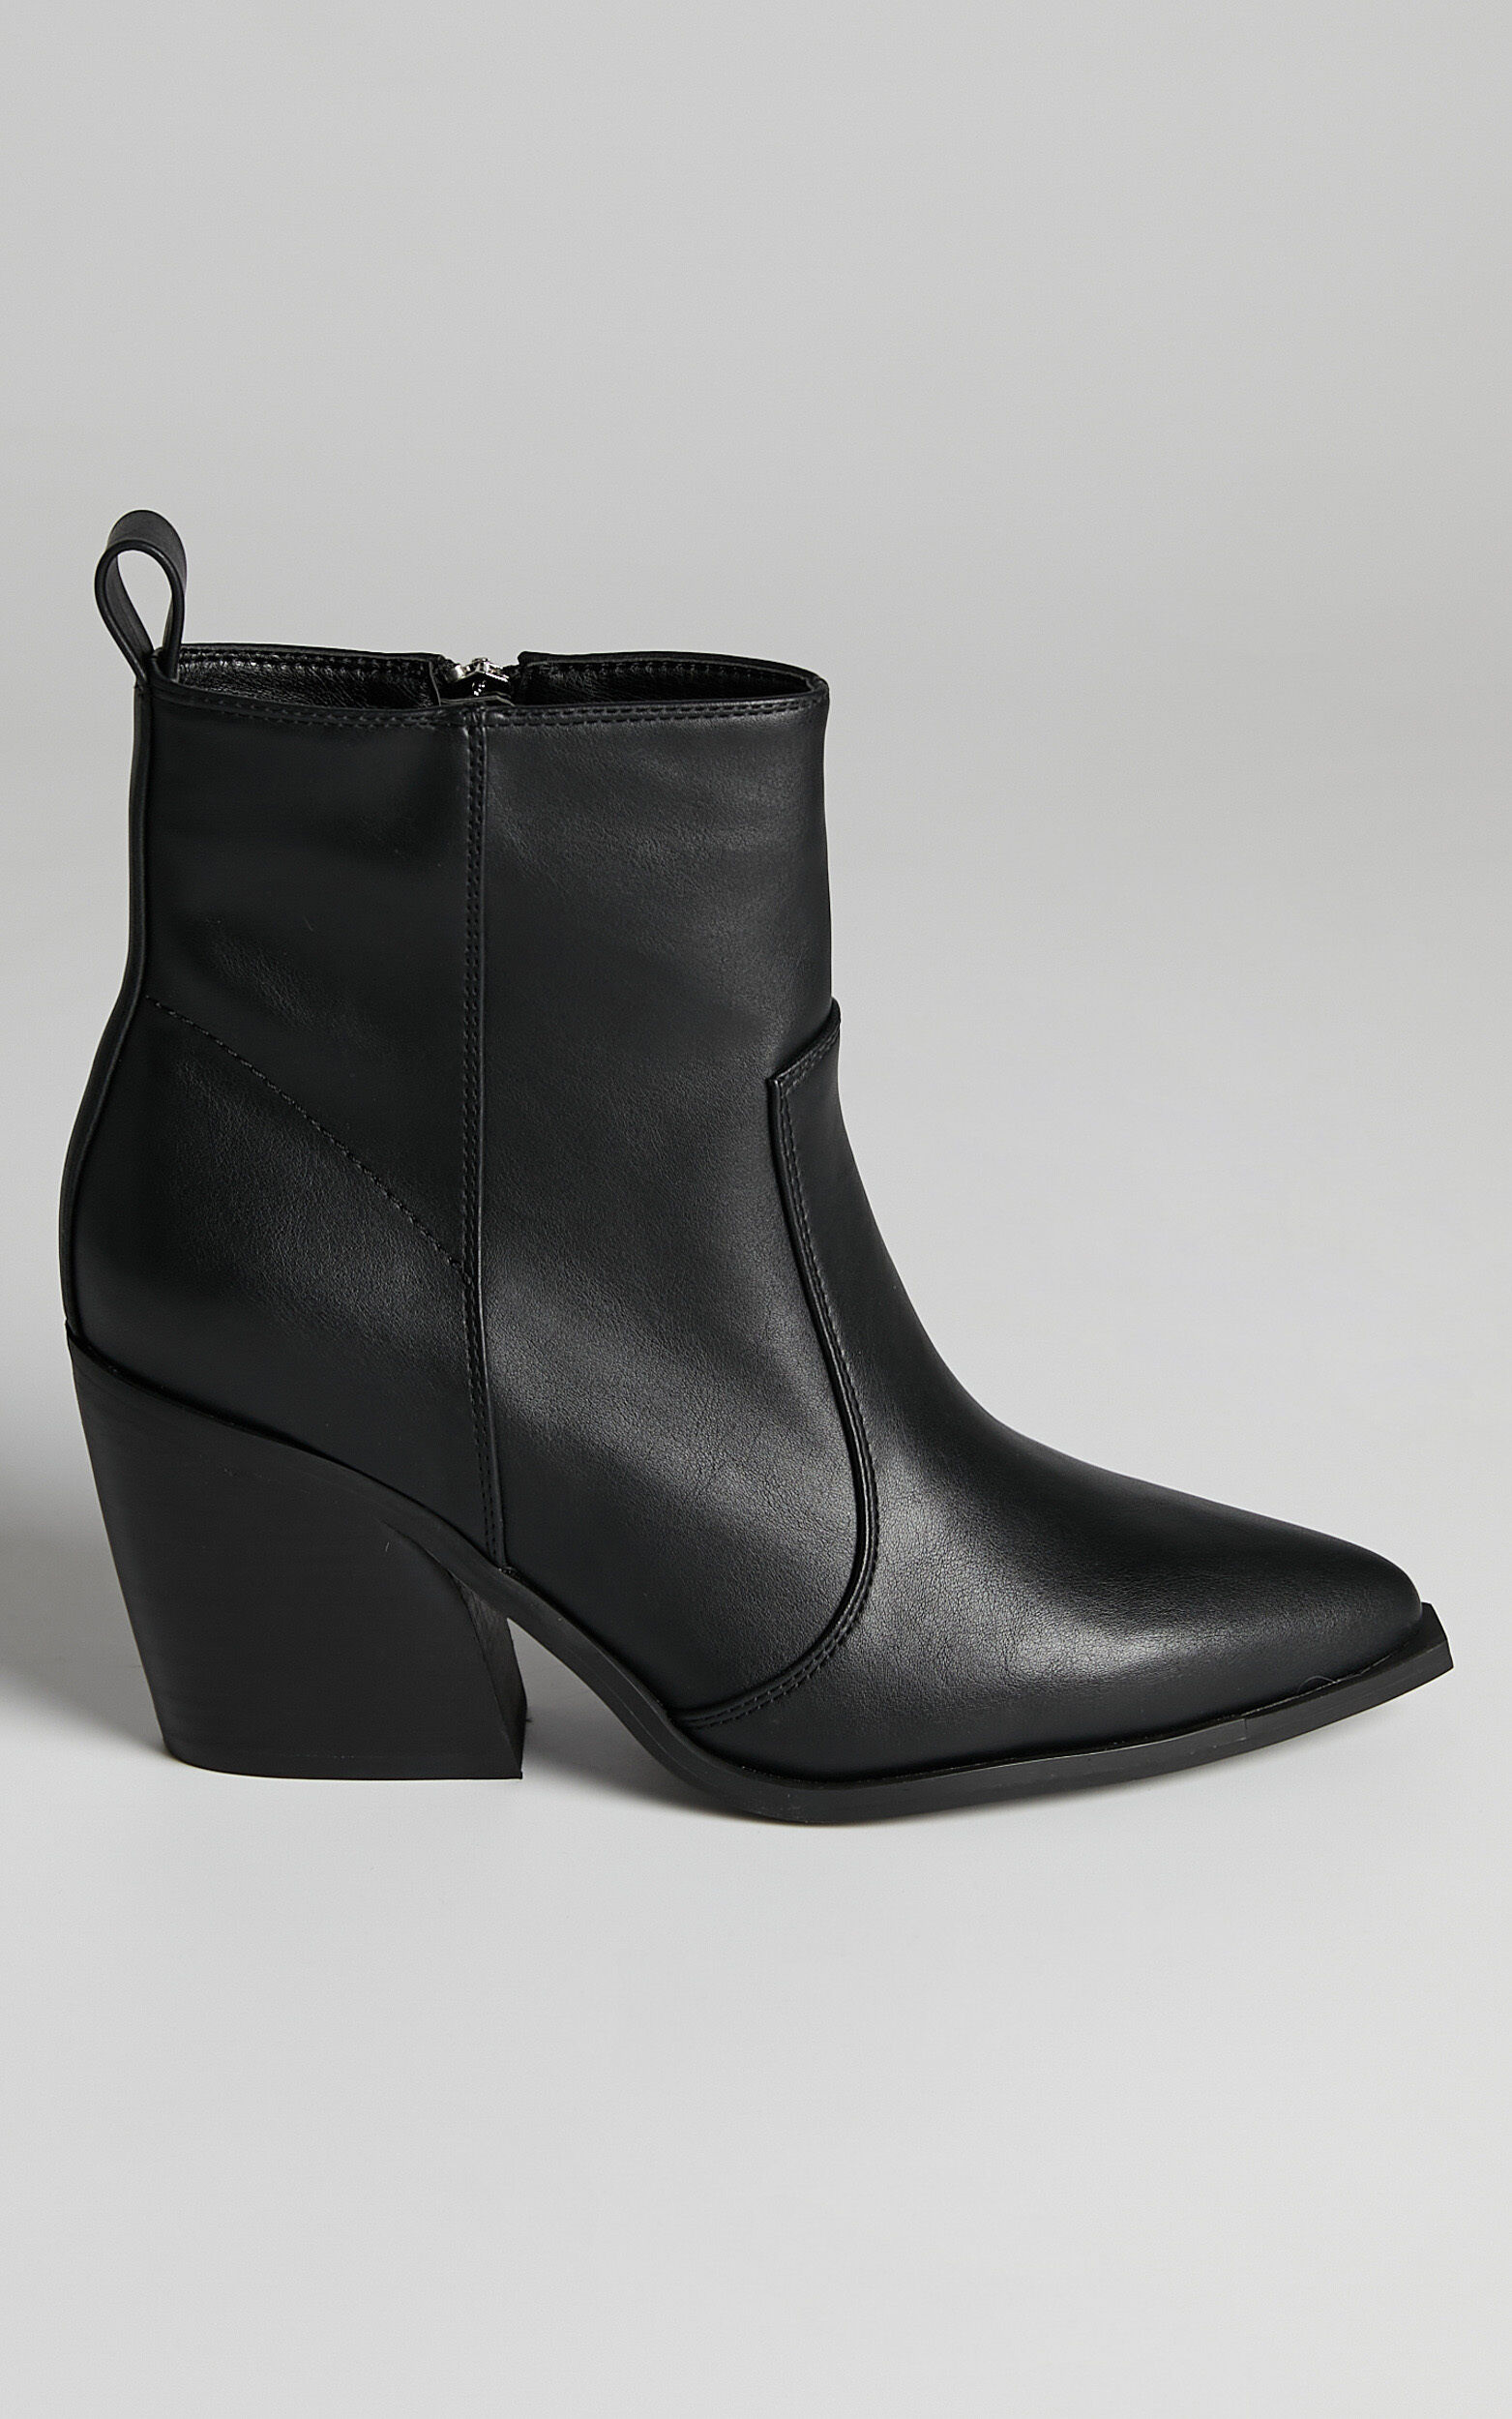 Therapy - Dallas Boots in Black - 05, BLK1, super-hi-res image number null